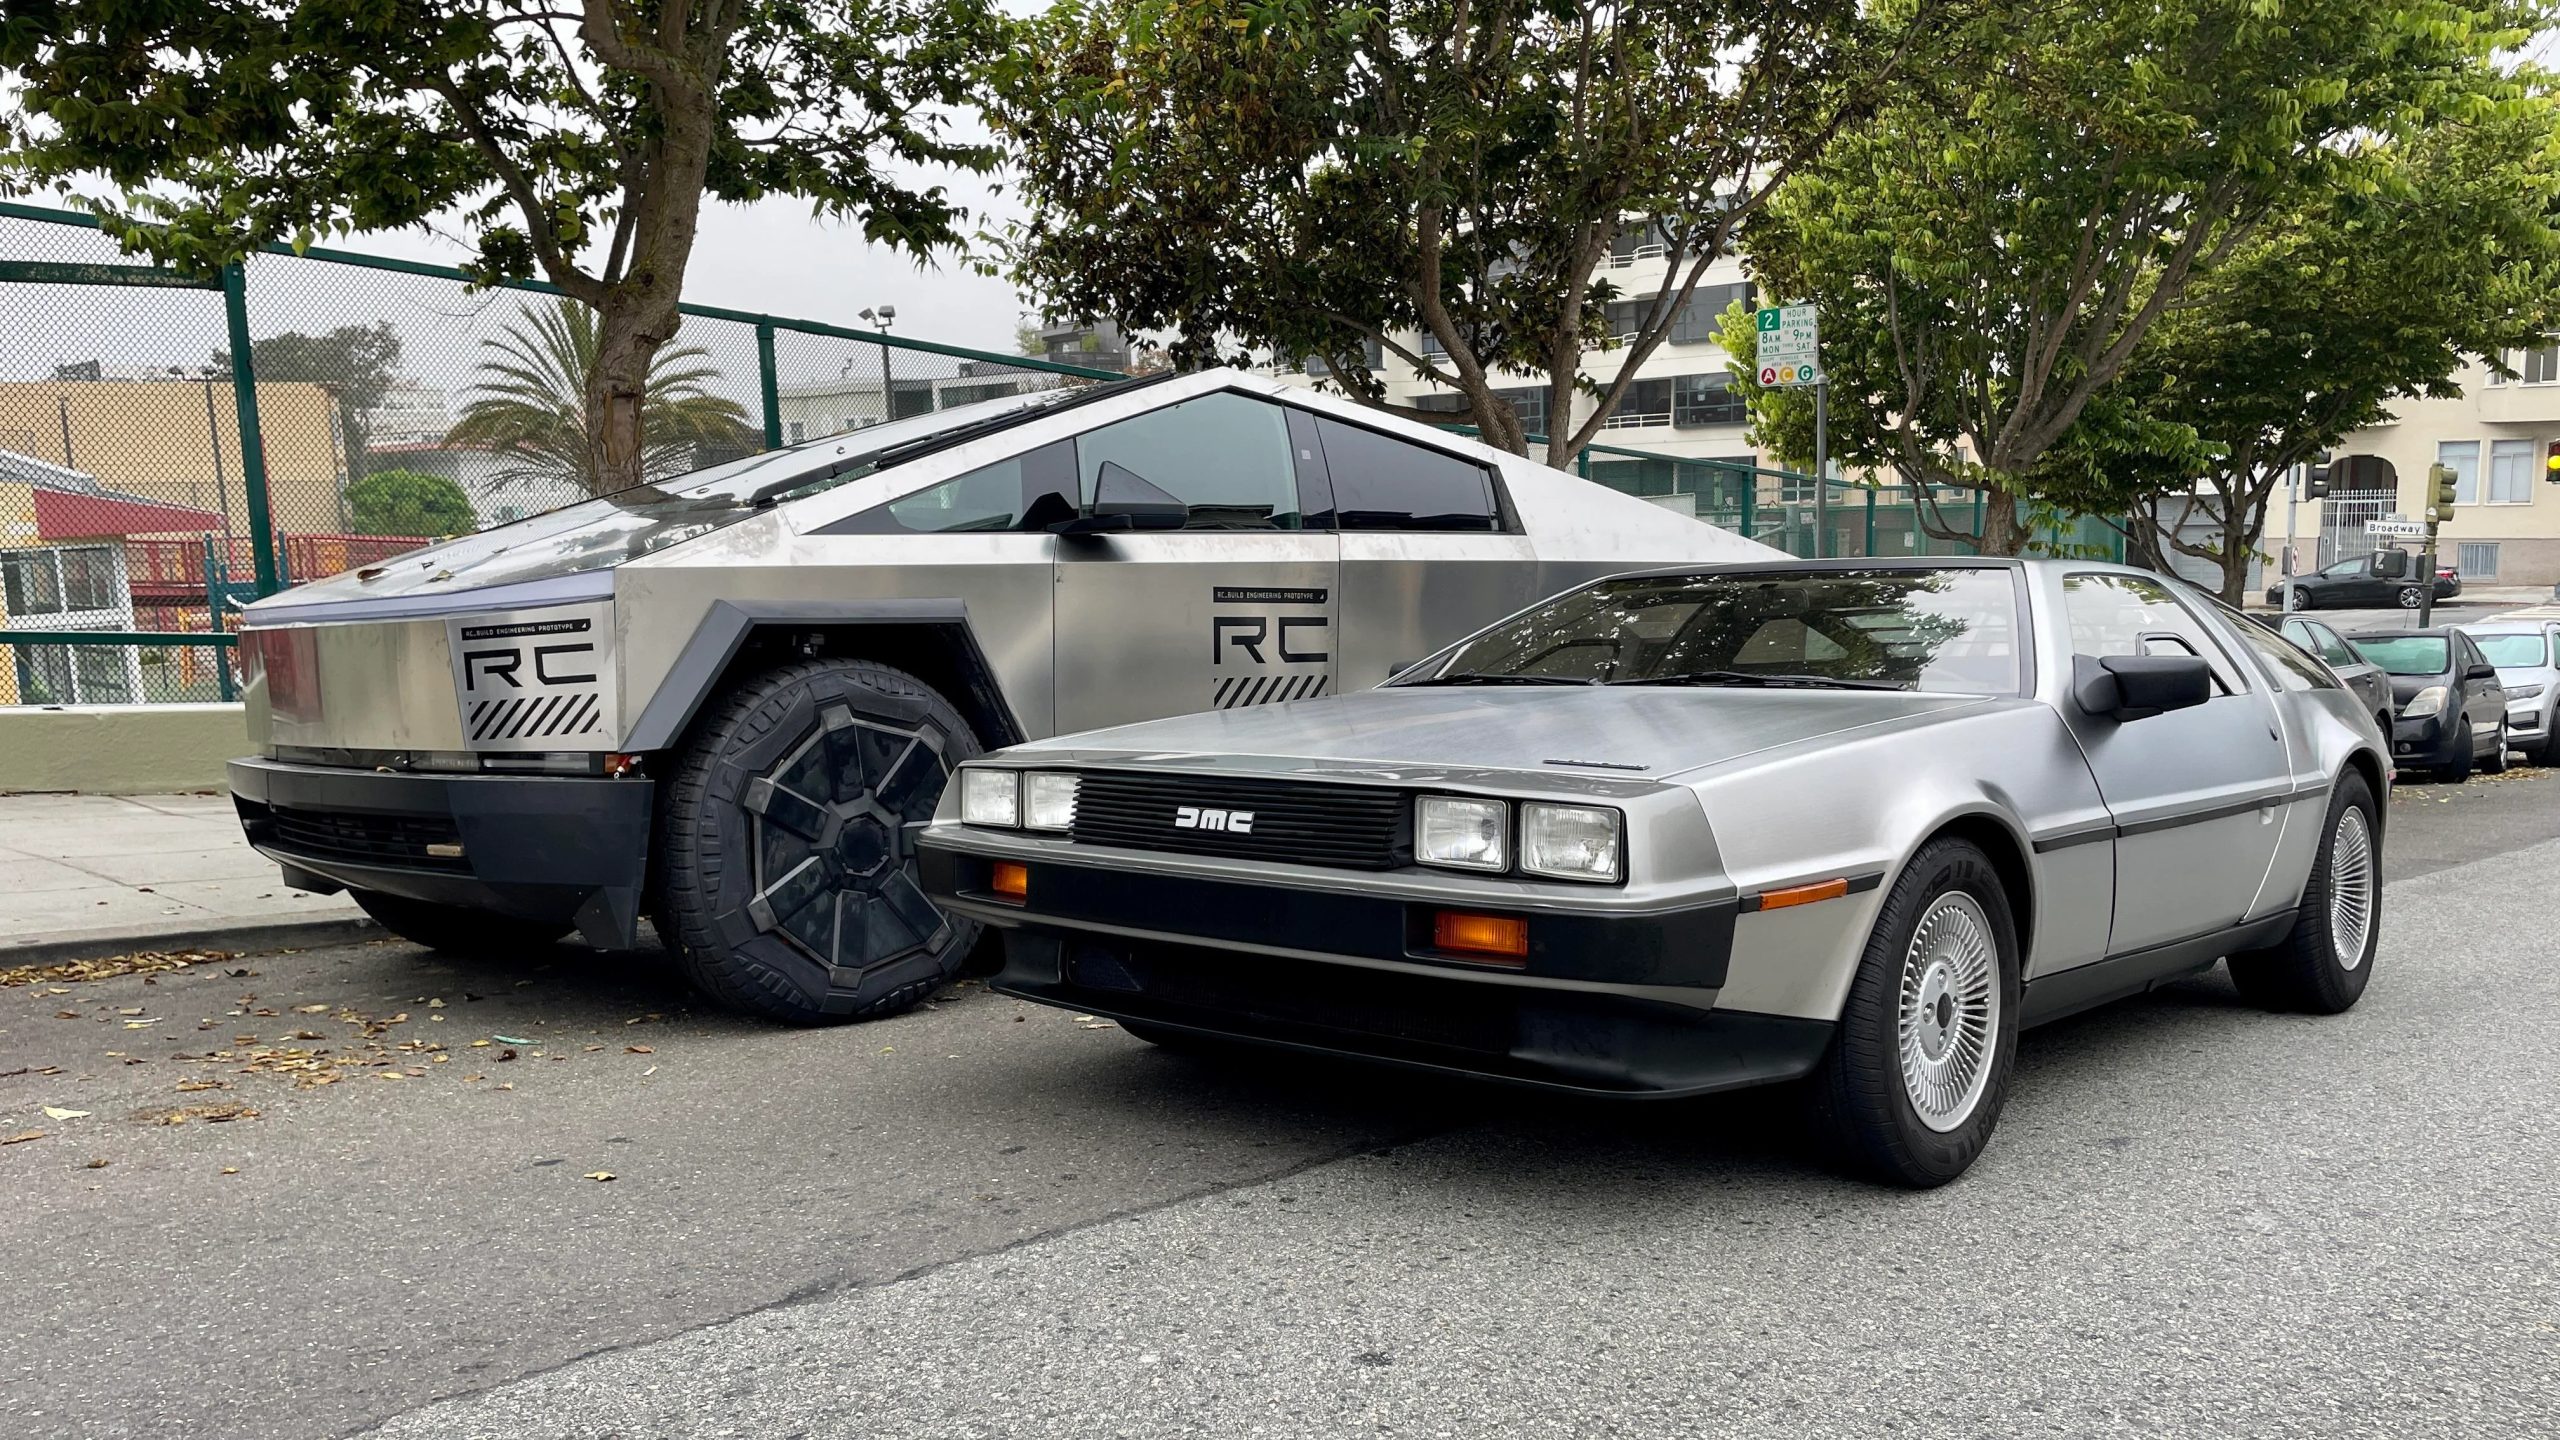 cybertruck-and-delorean-front